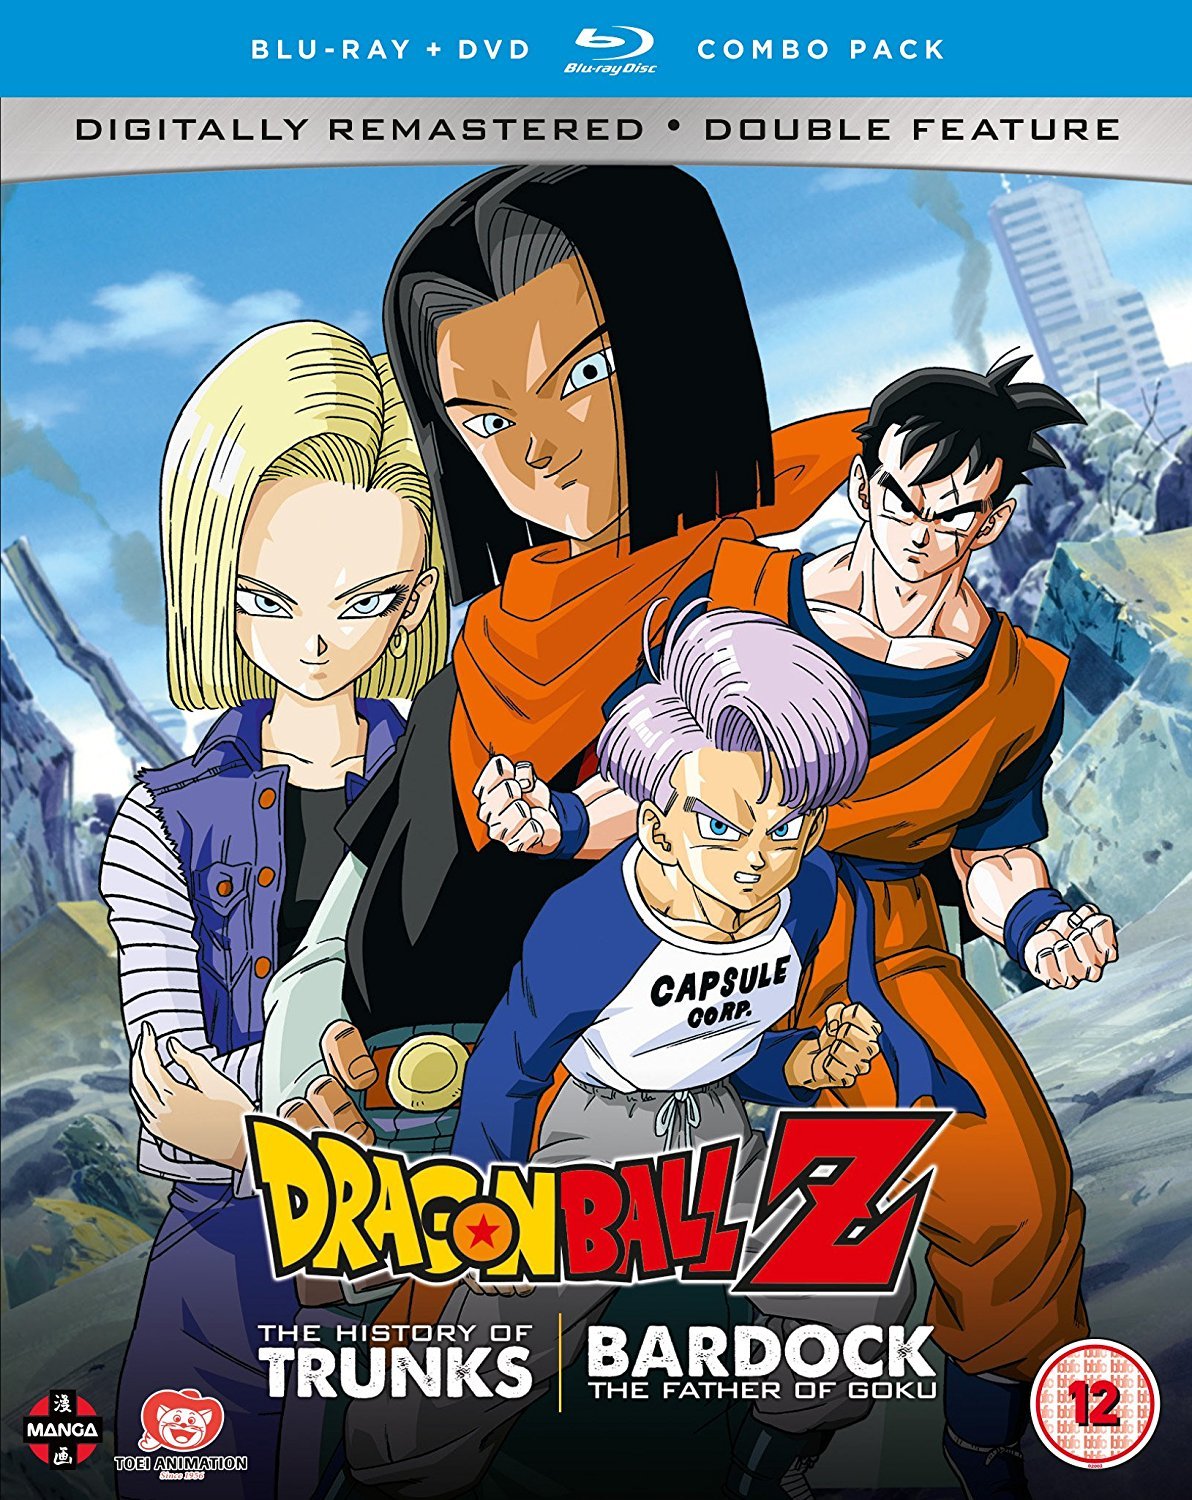  Dragon Ball Z Movie Collection Four: Super Android 13!/Bojack  Unbound - DVD/Blu-ray Combo : Movies & TV